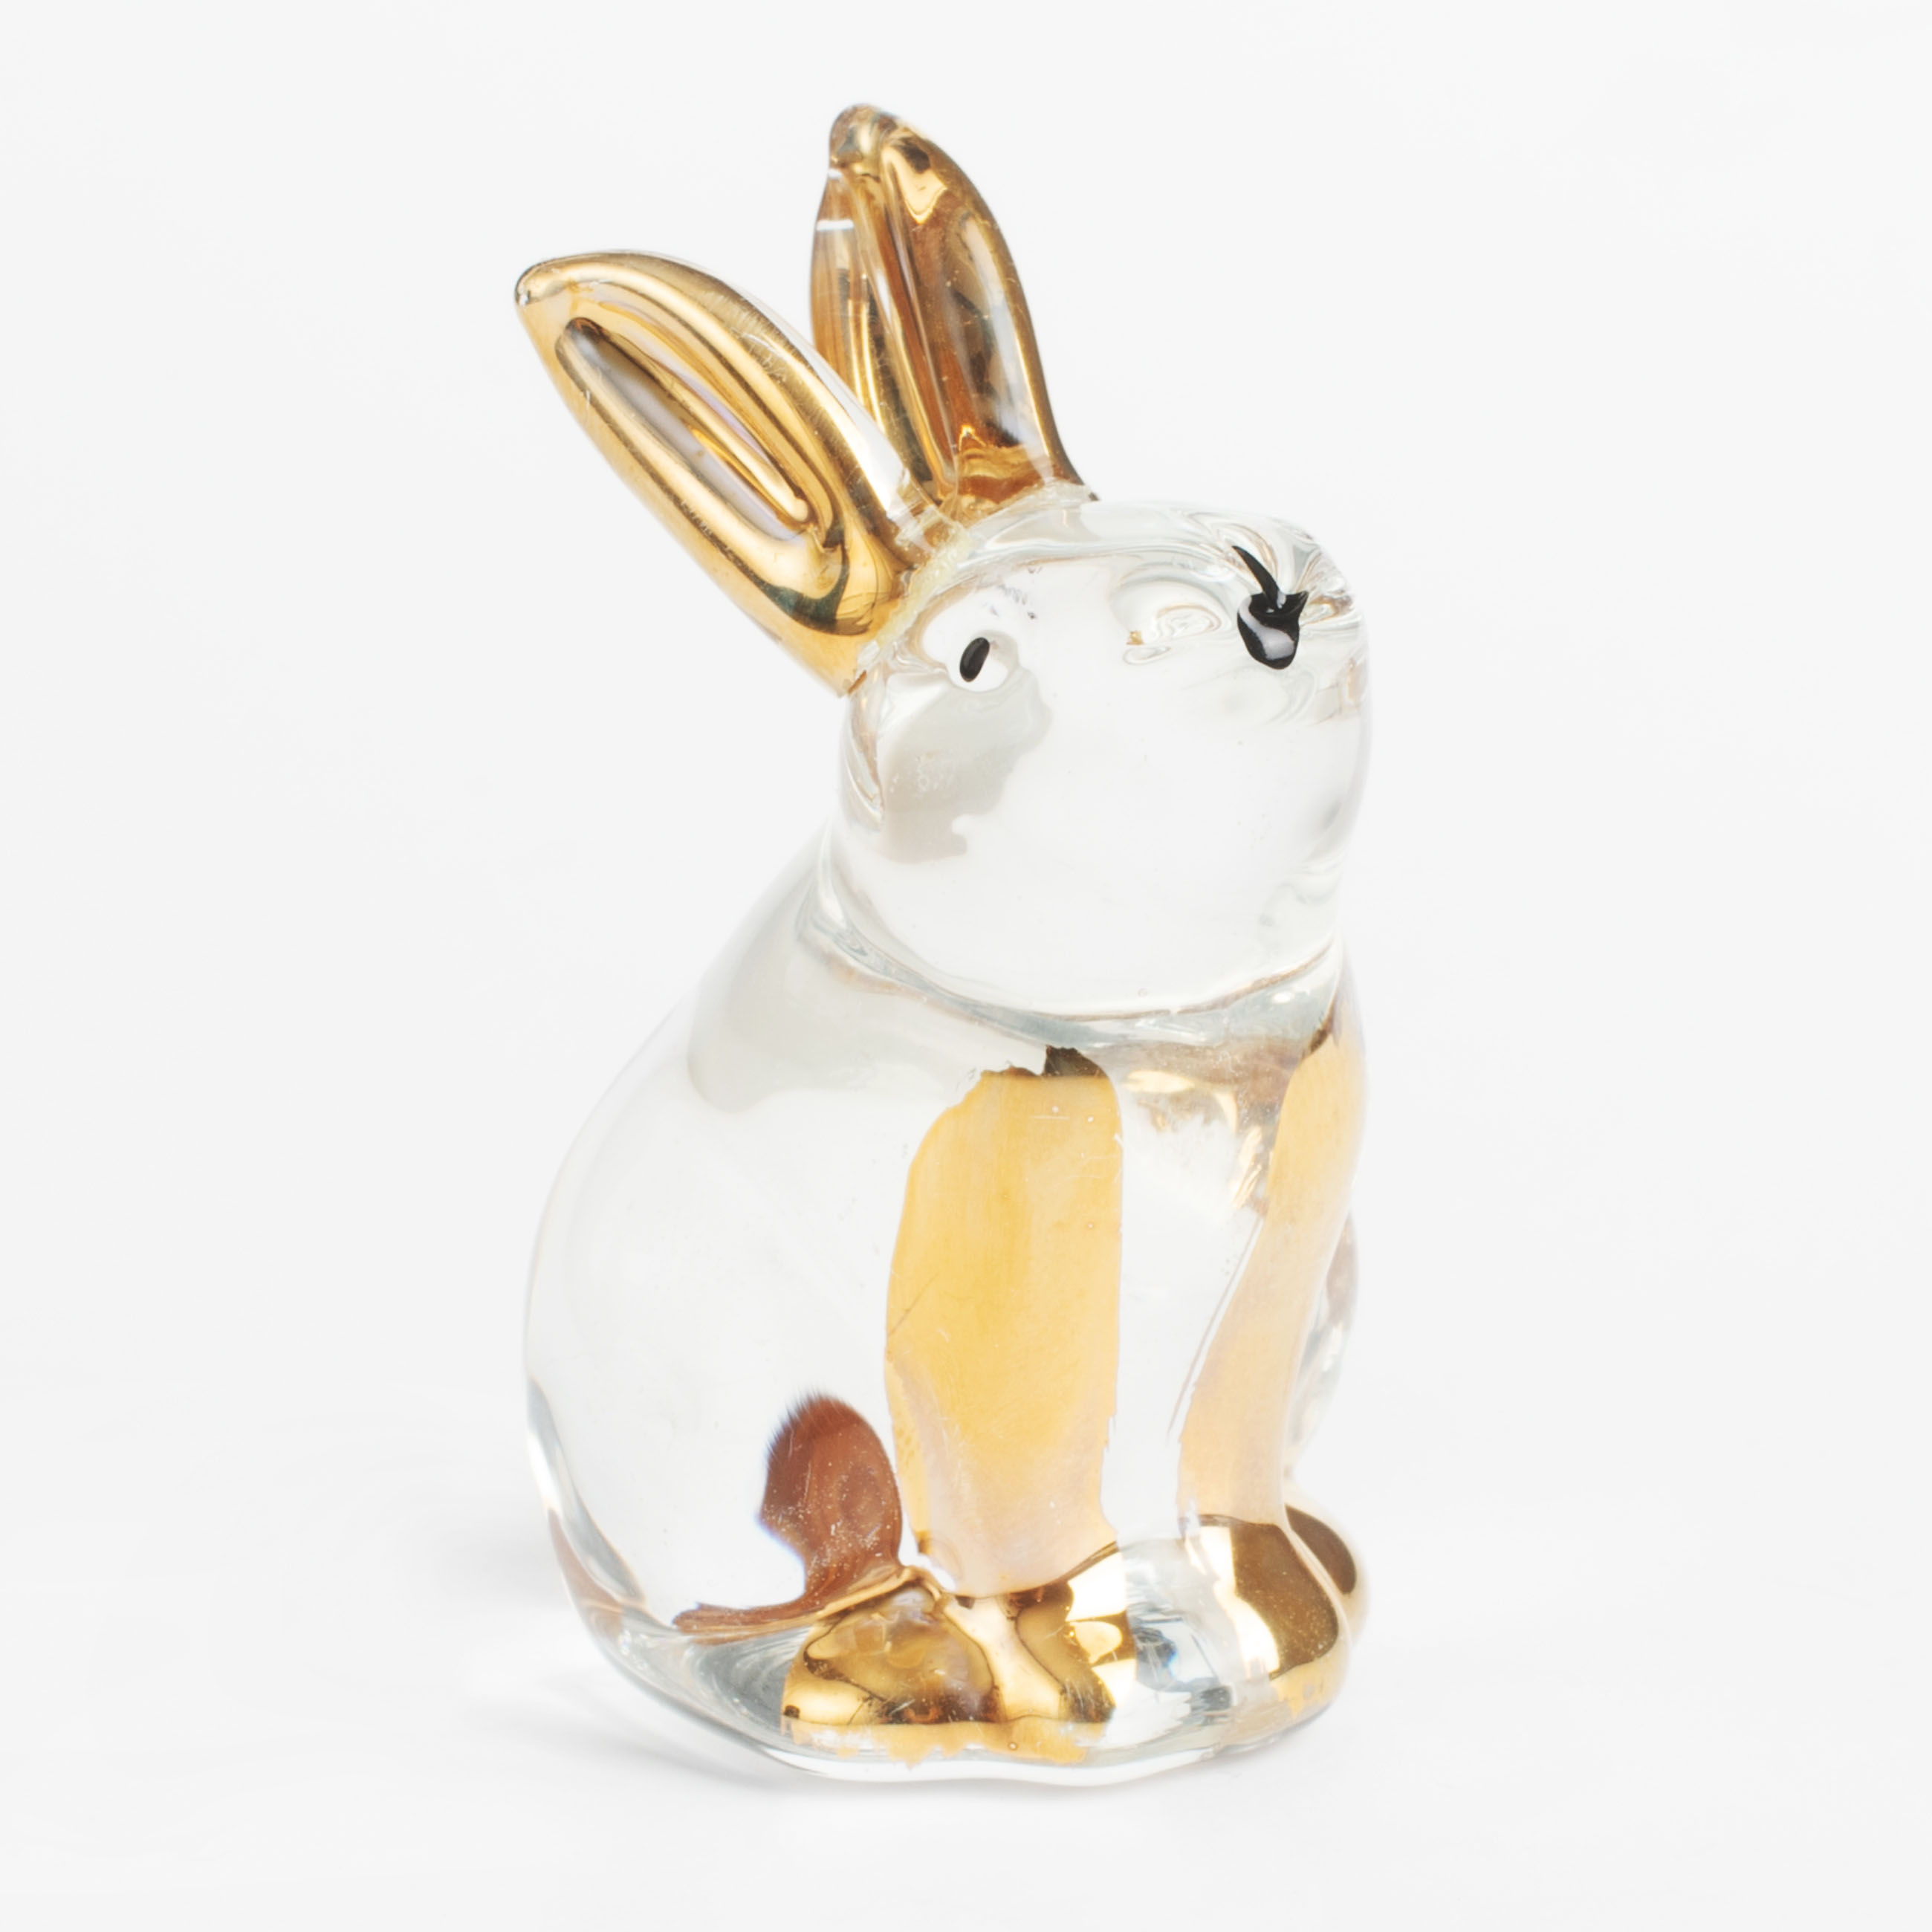 Statuette, 6 cm, glass, Rabbit with golden ears and paws, Vitreous изображение № 2